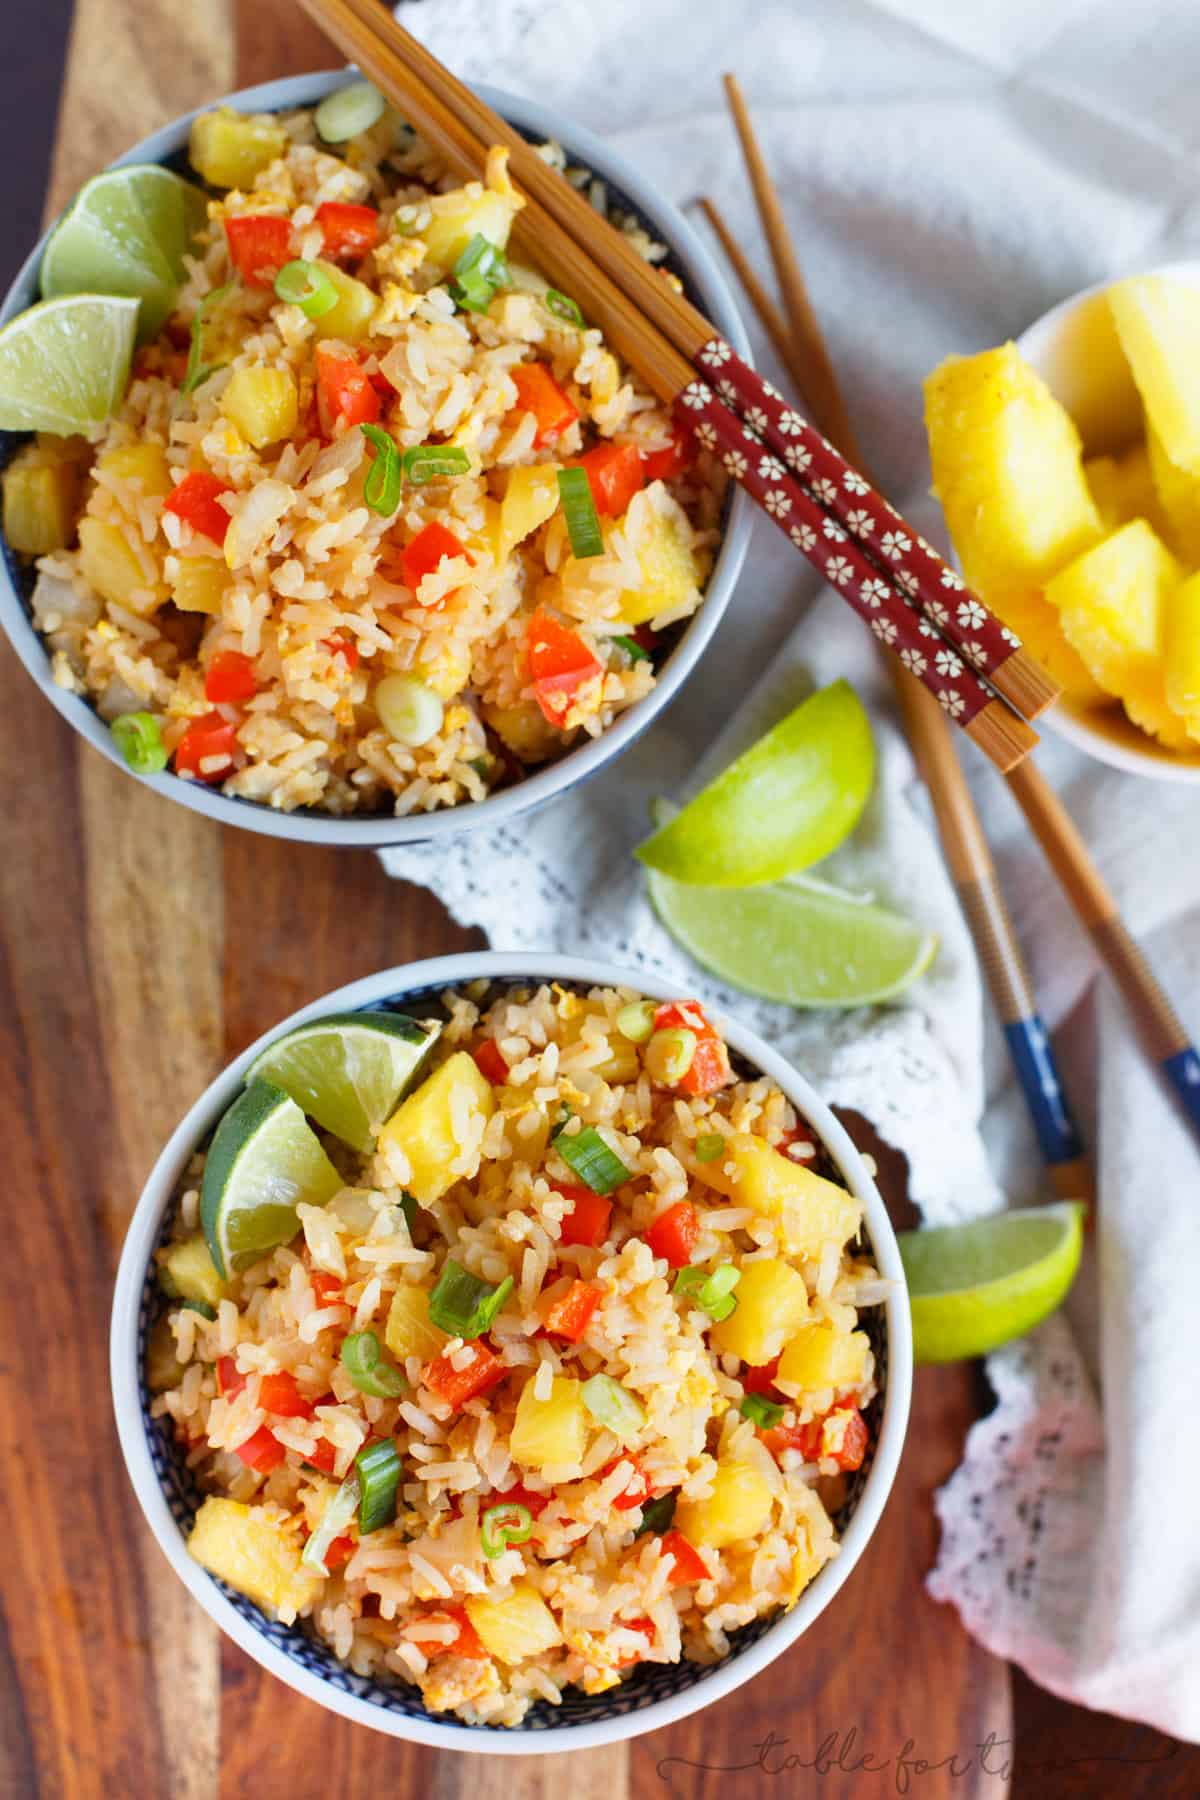 Take-out or take-in? You won't be able to tell that this pineapple fried rice was homemade and just as delicious as calling your neighborhood Thai takeout place! Much healthier to make this pineapple fried rice at home and it's super easy!